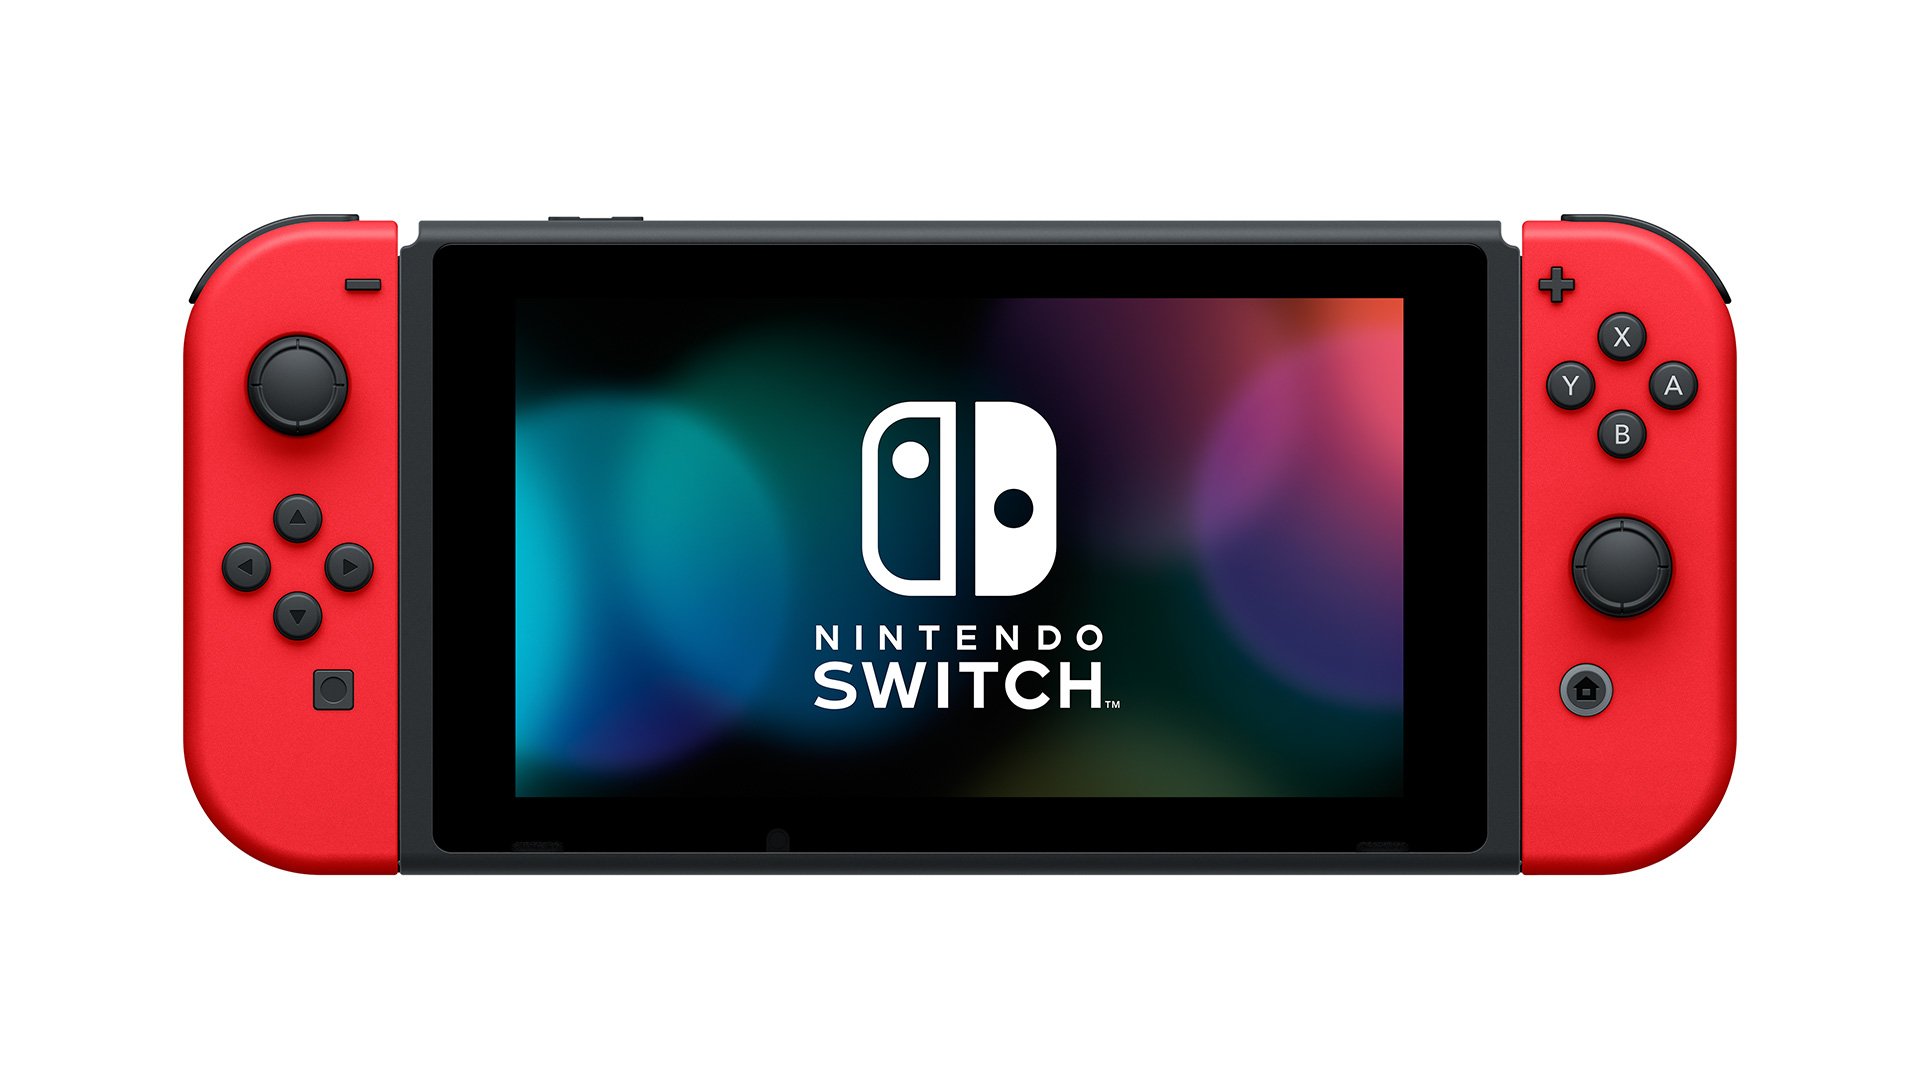 New Switch Model With A Stronger Cpu Is Expected To Be Launched